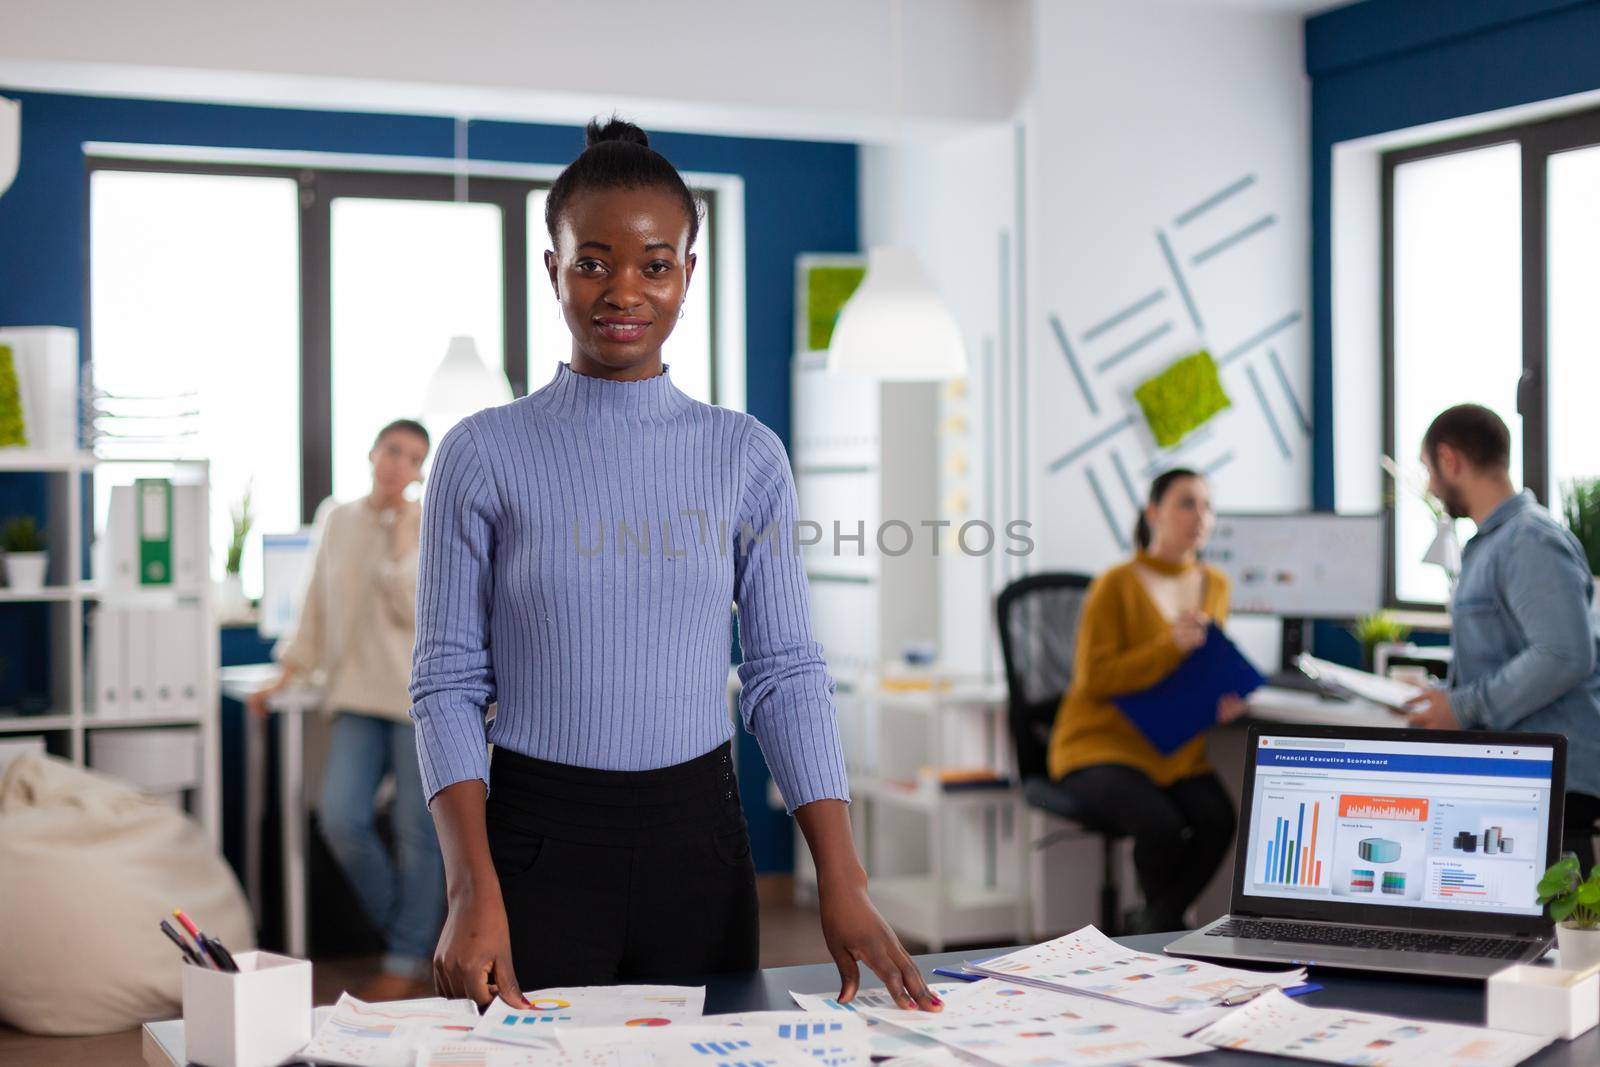 Black woman entrepreneur looking at camera with business people working on project strategy. Diverse team of business people analyzing company financial reports from computer.